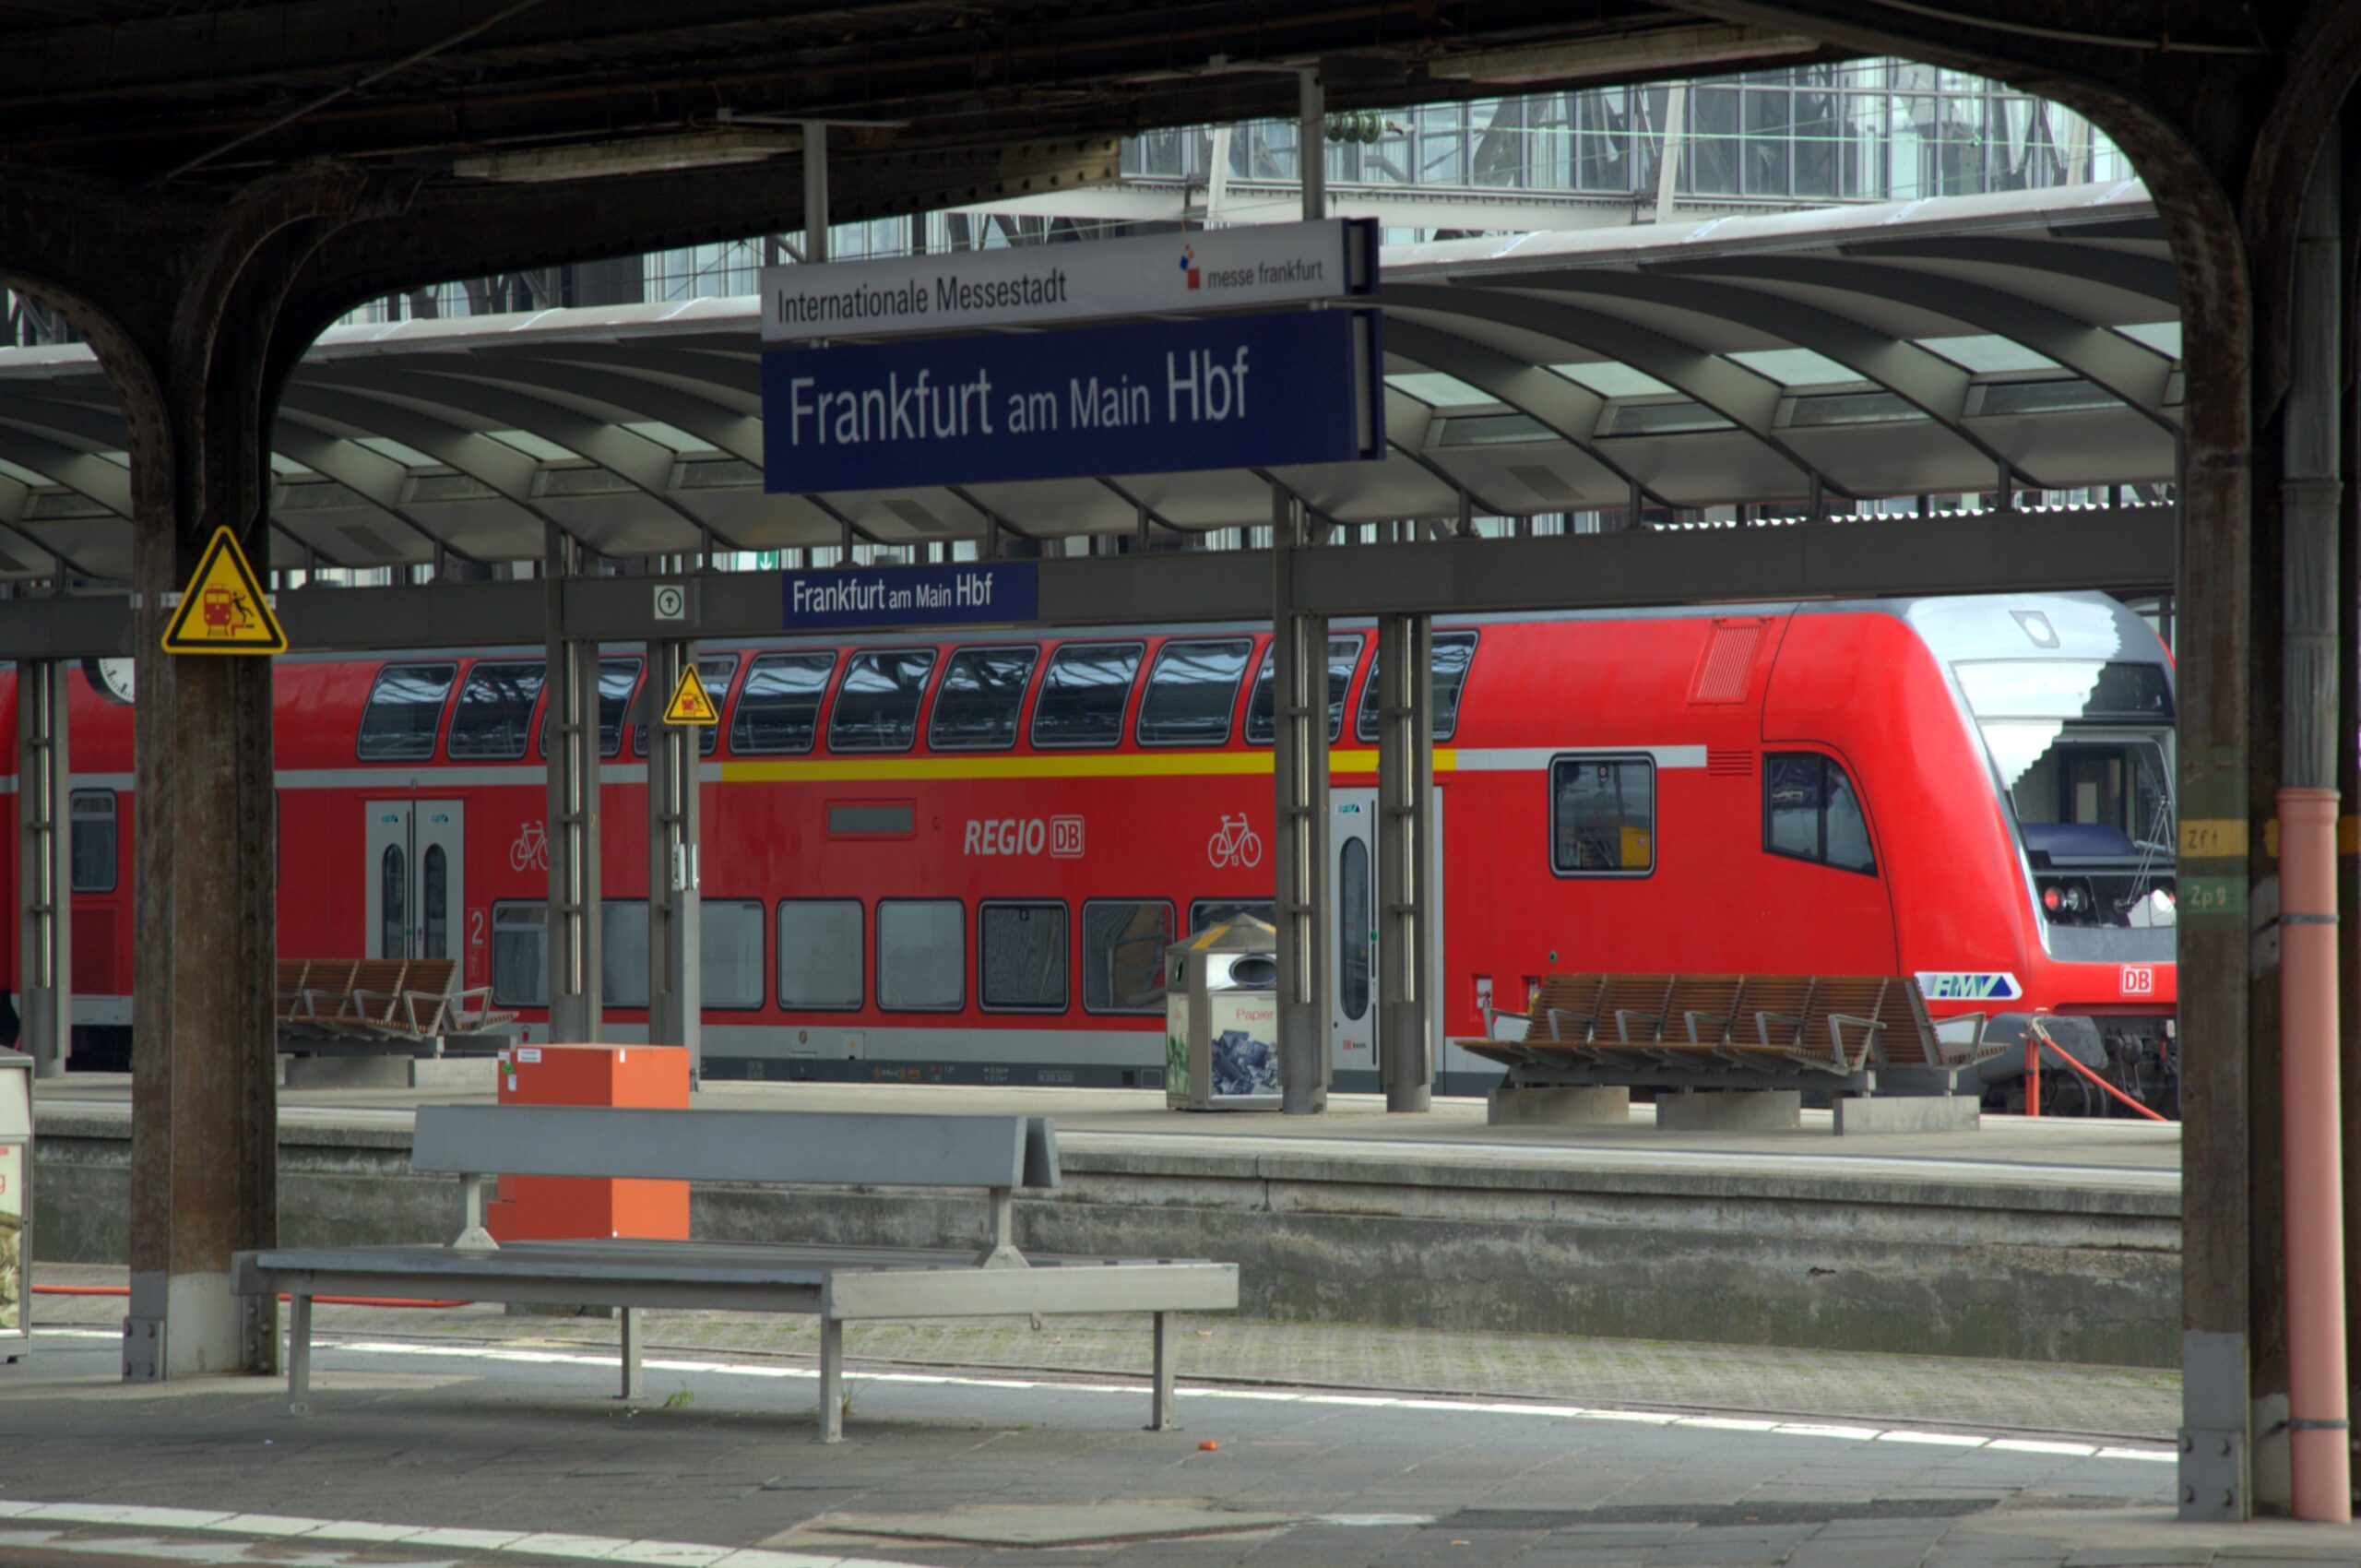 A train stopped at a station platform in Germany.